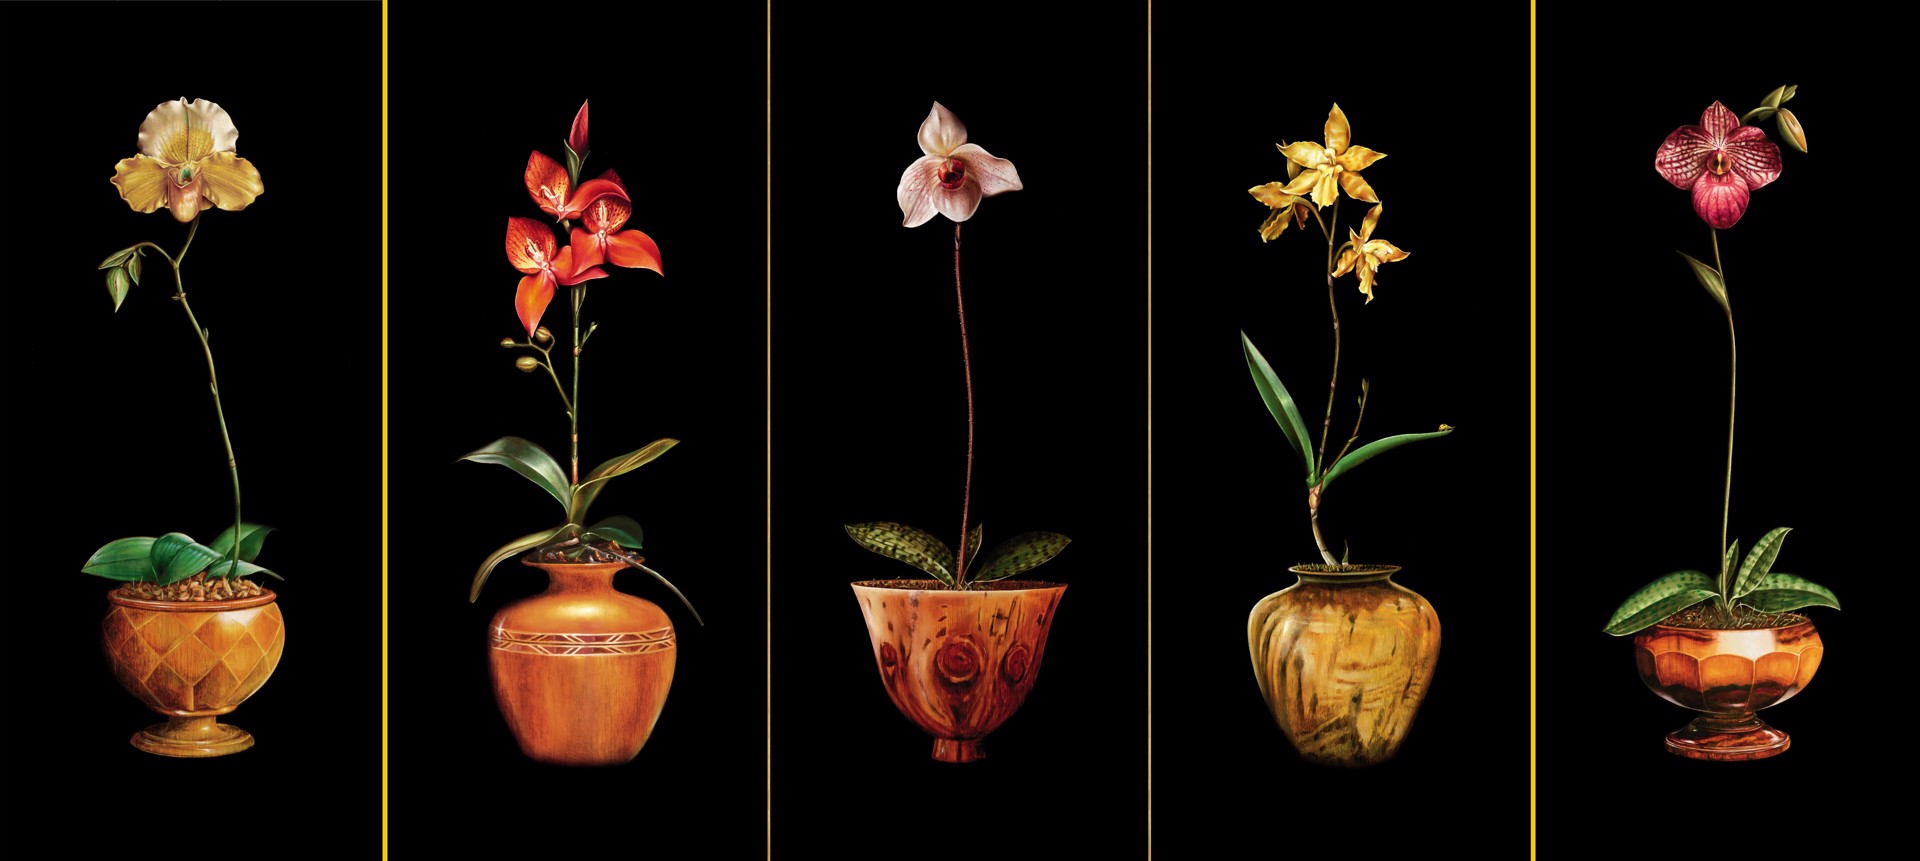 Orchid Suite Triptych by The Twins